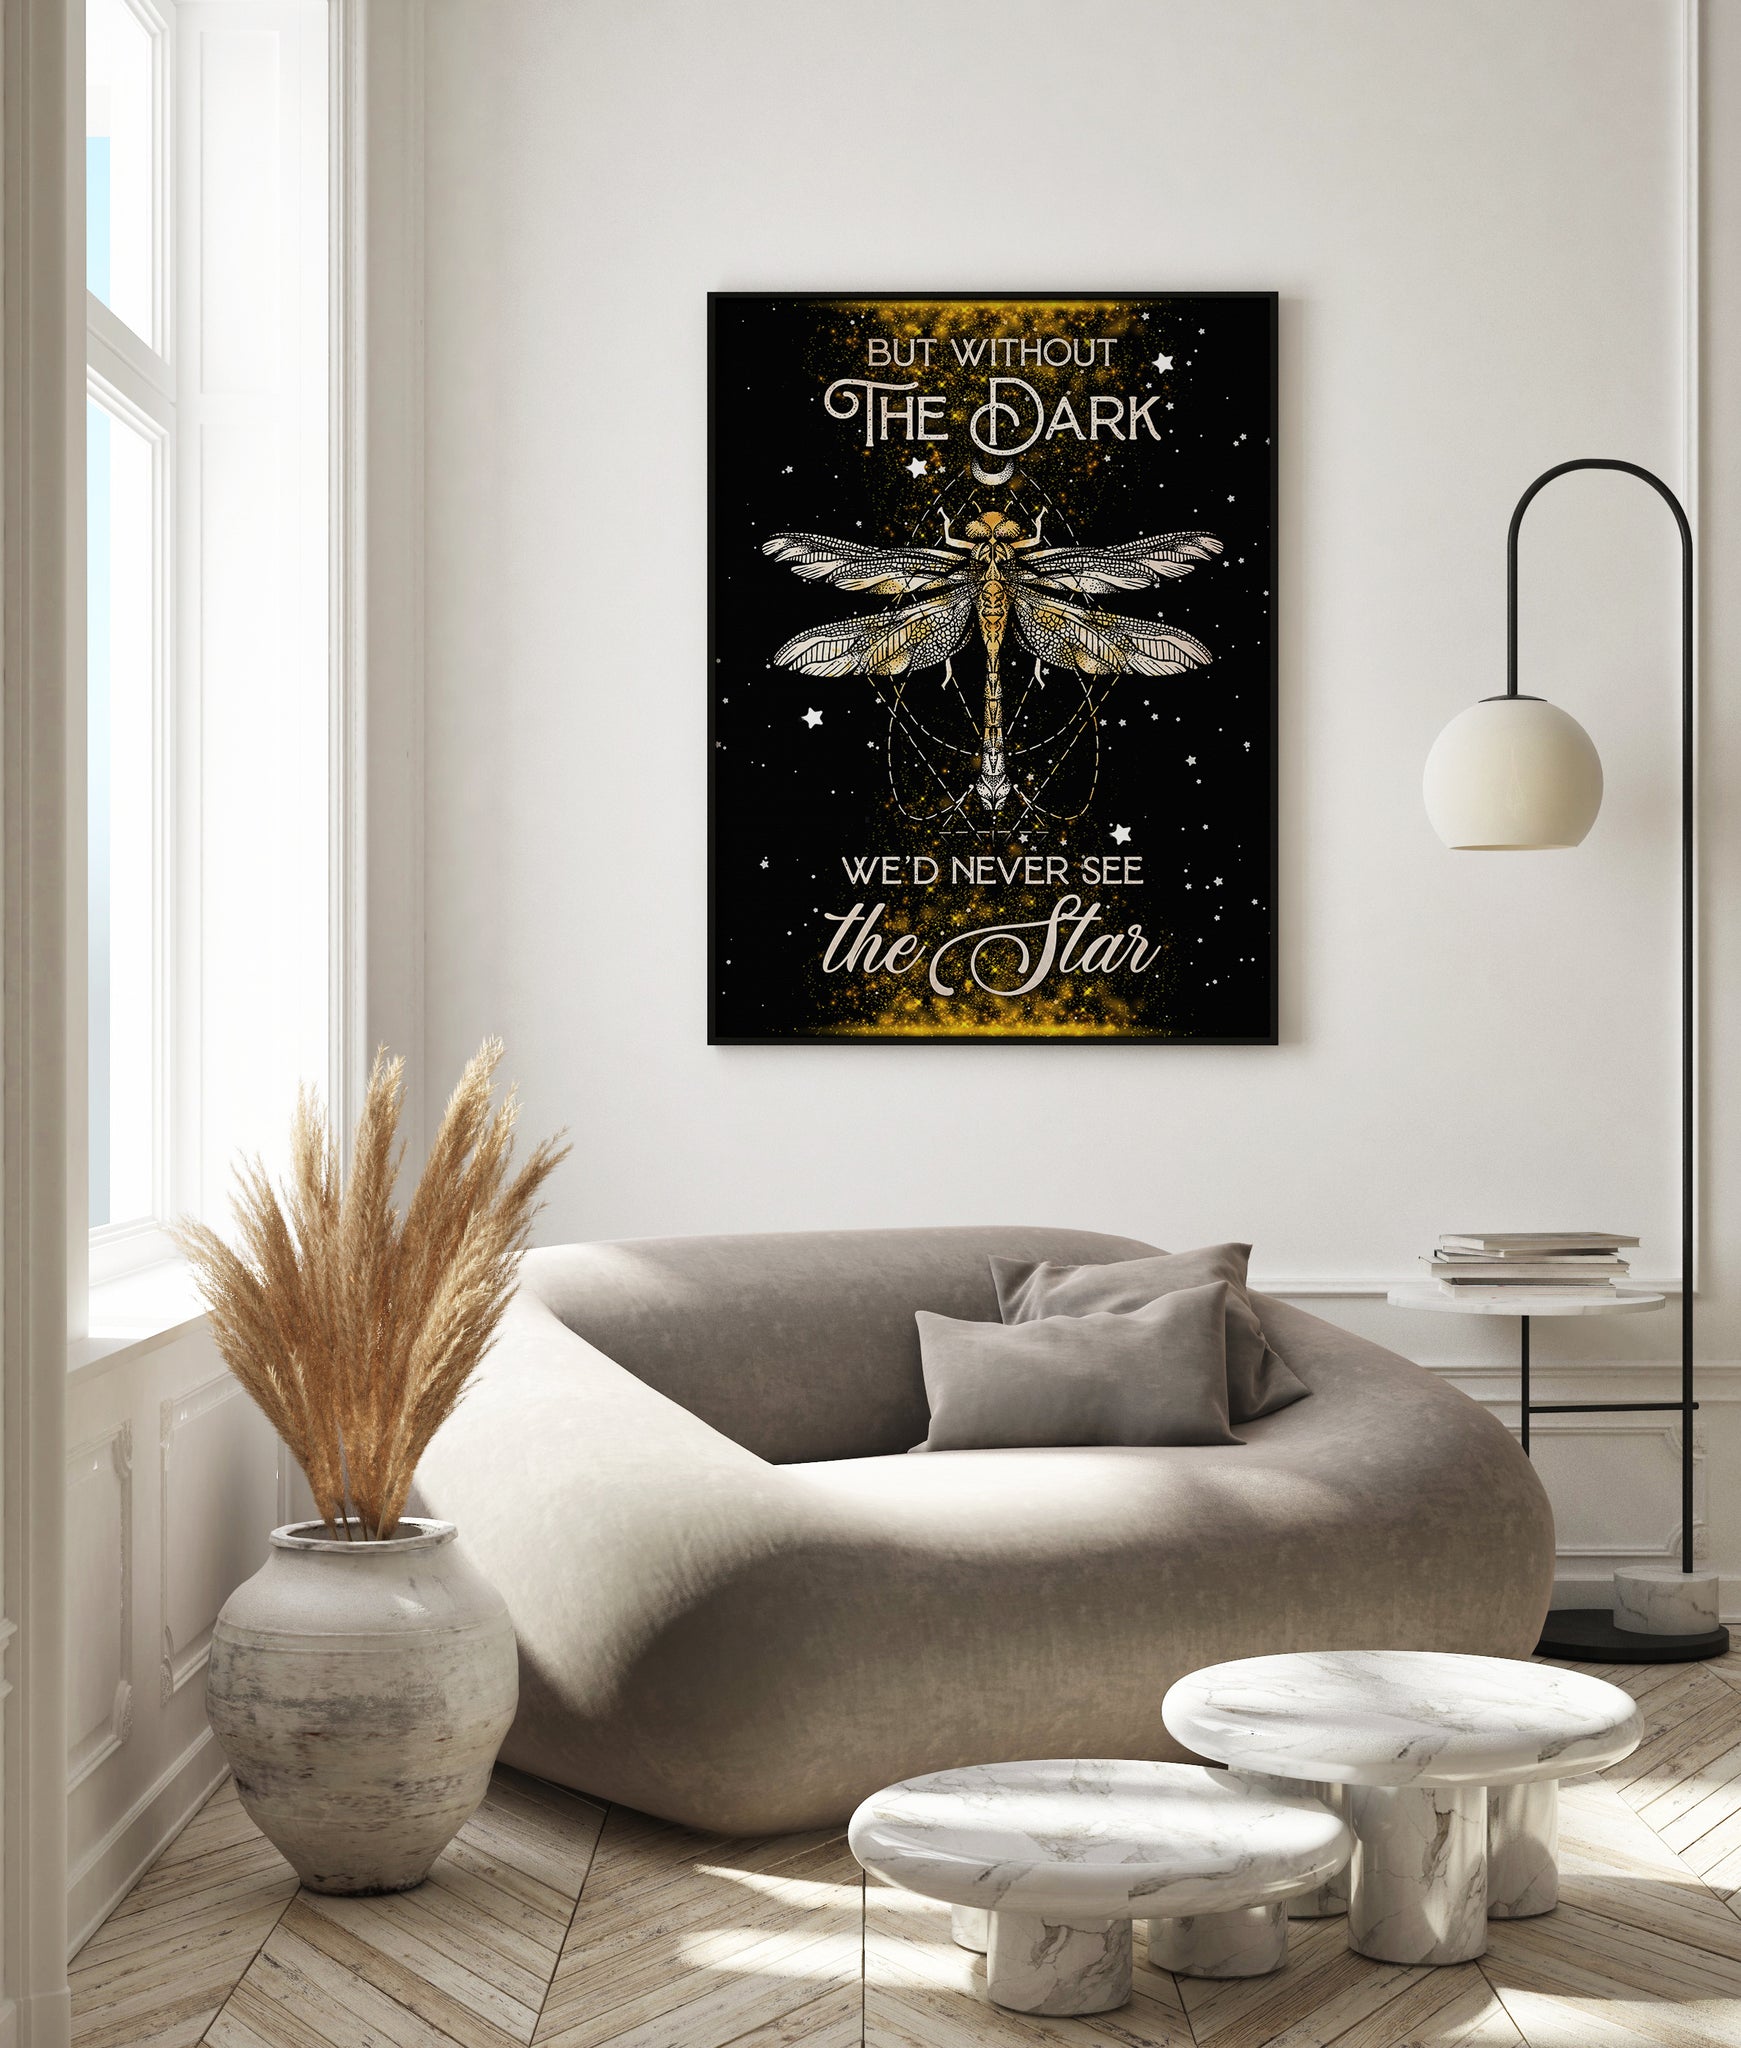 But Without The Dark Dragonfly We'd Never See The Stars Poster Wall Art Decor 